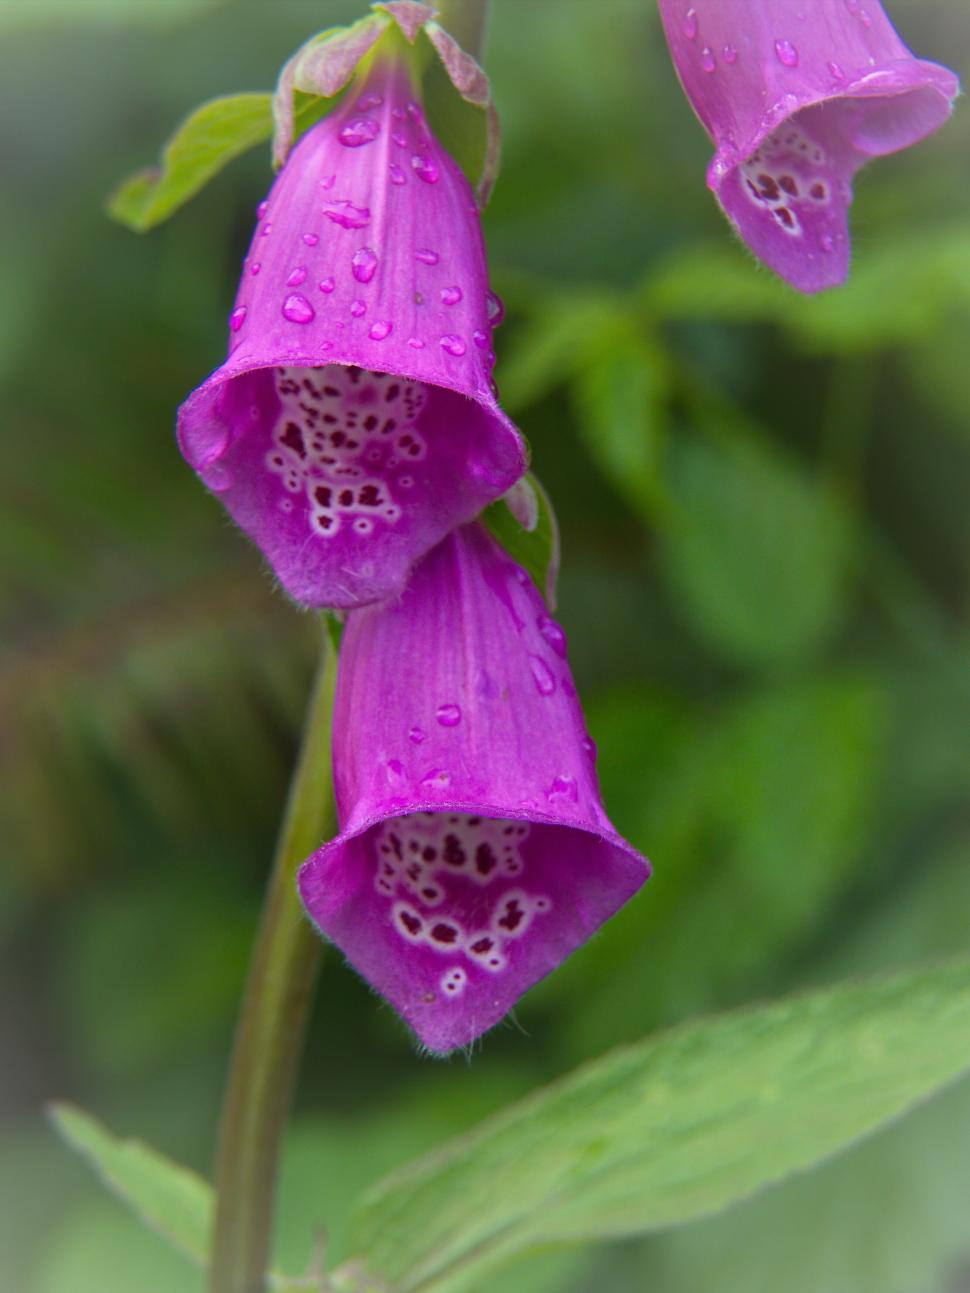 Free Image of Purple Foxglove Flowers Dripping with Dew 